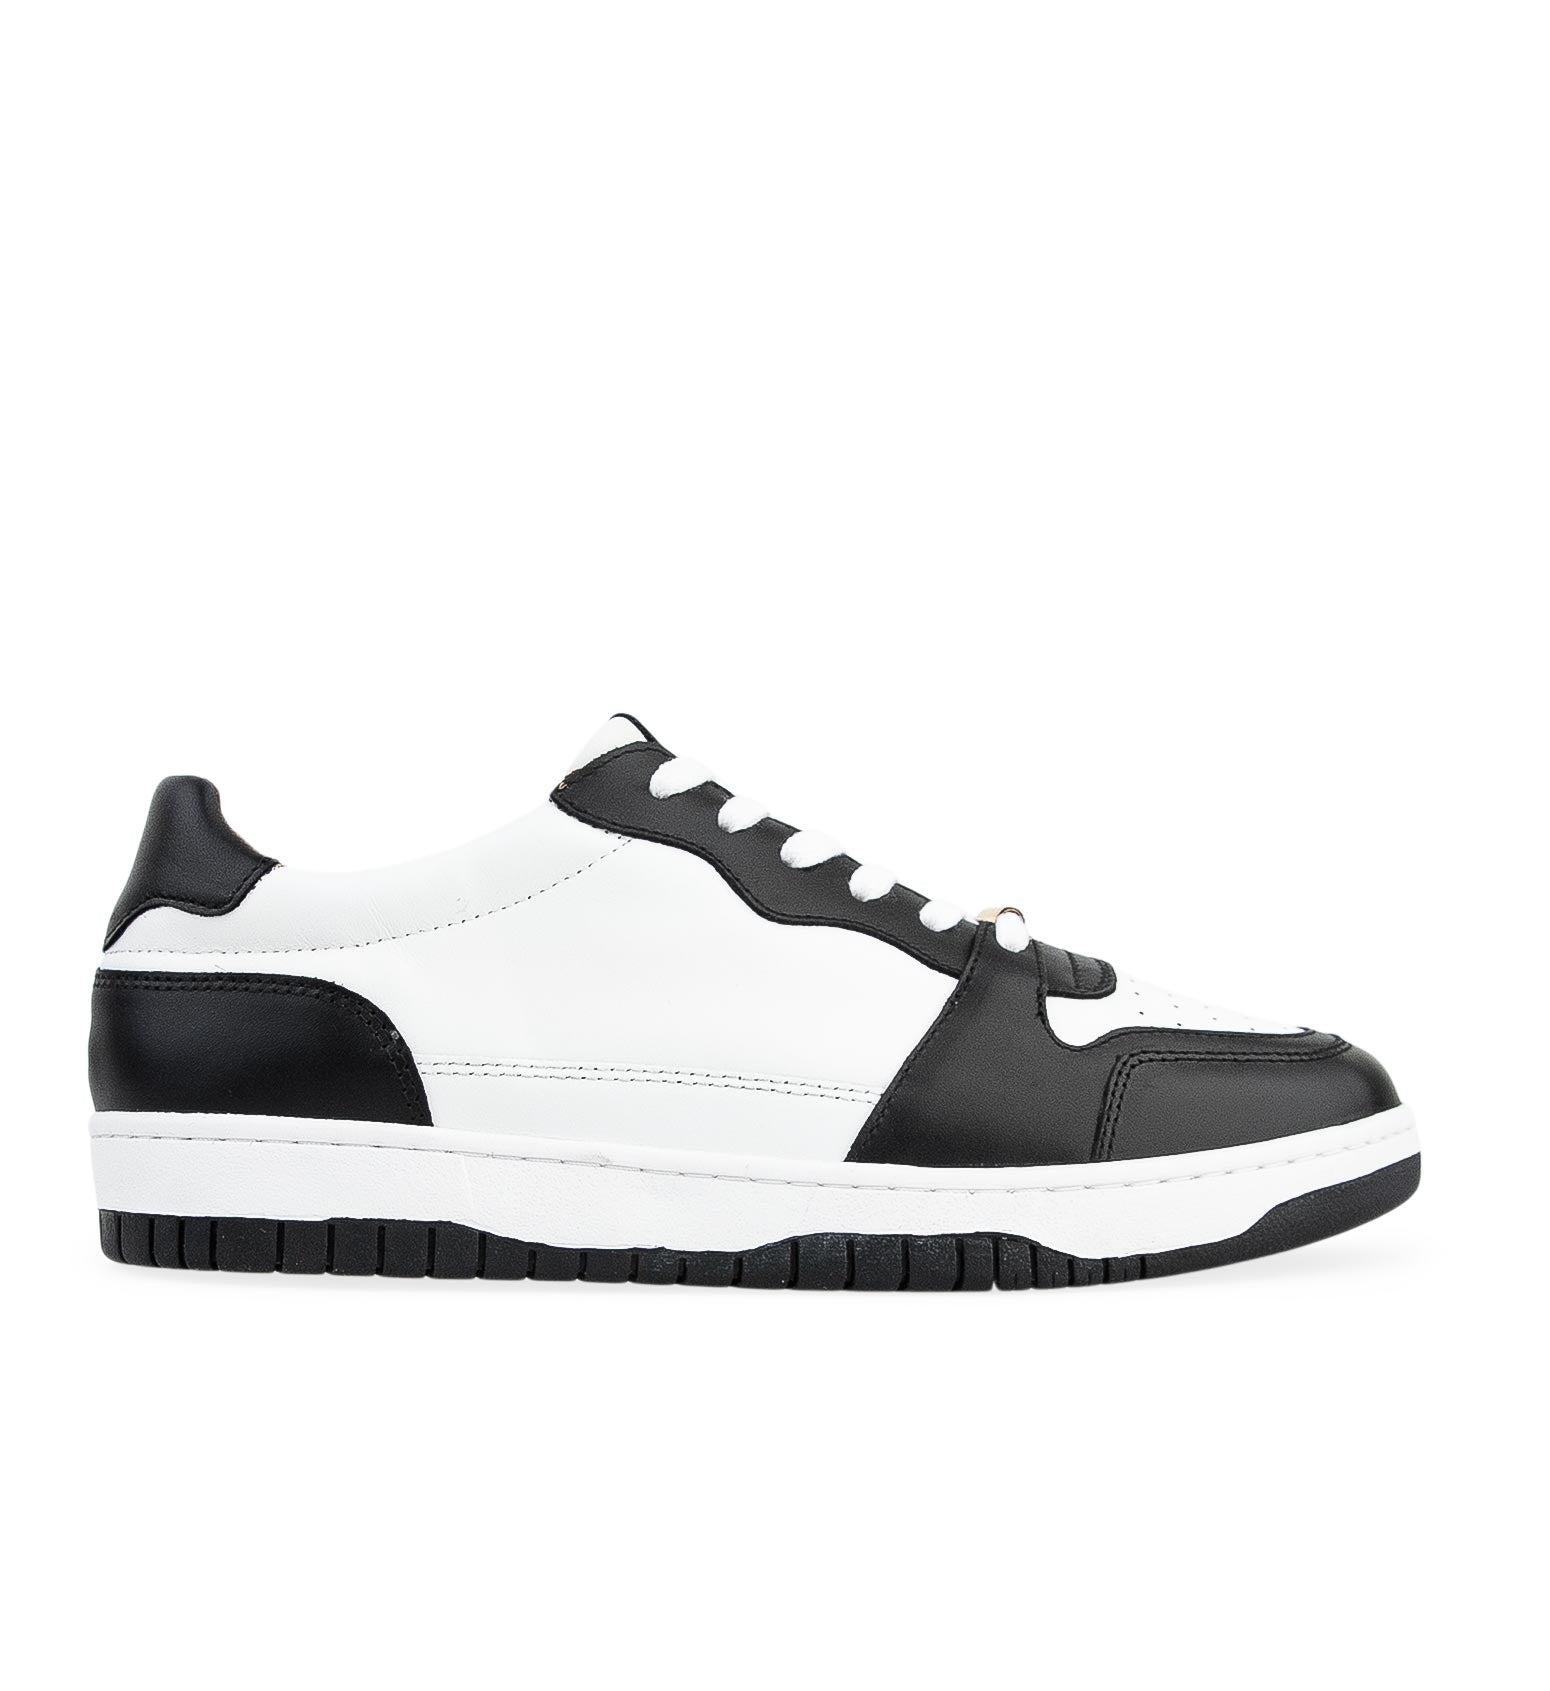 Tui White & Black Leather Sneakers | Bared Footwear